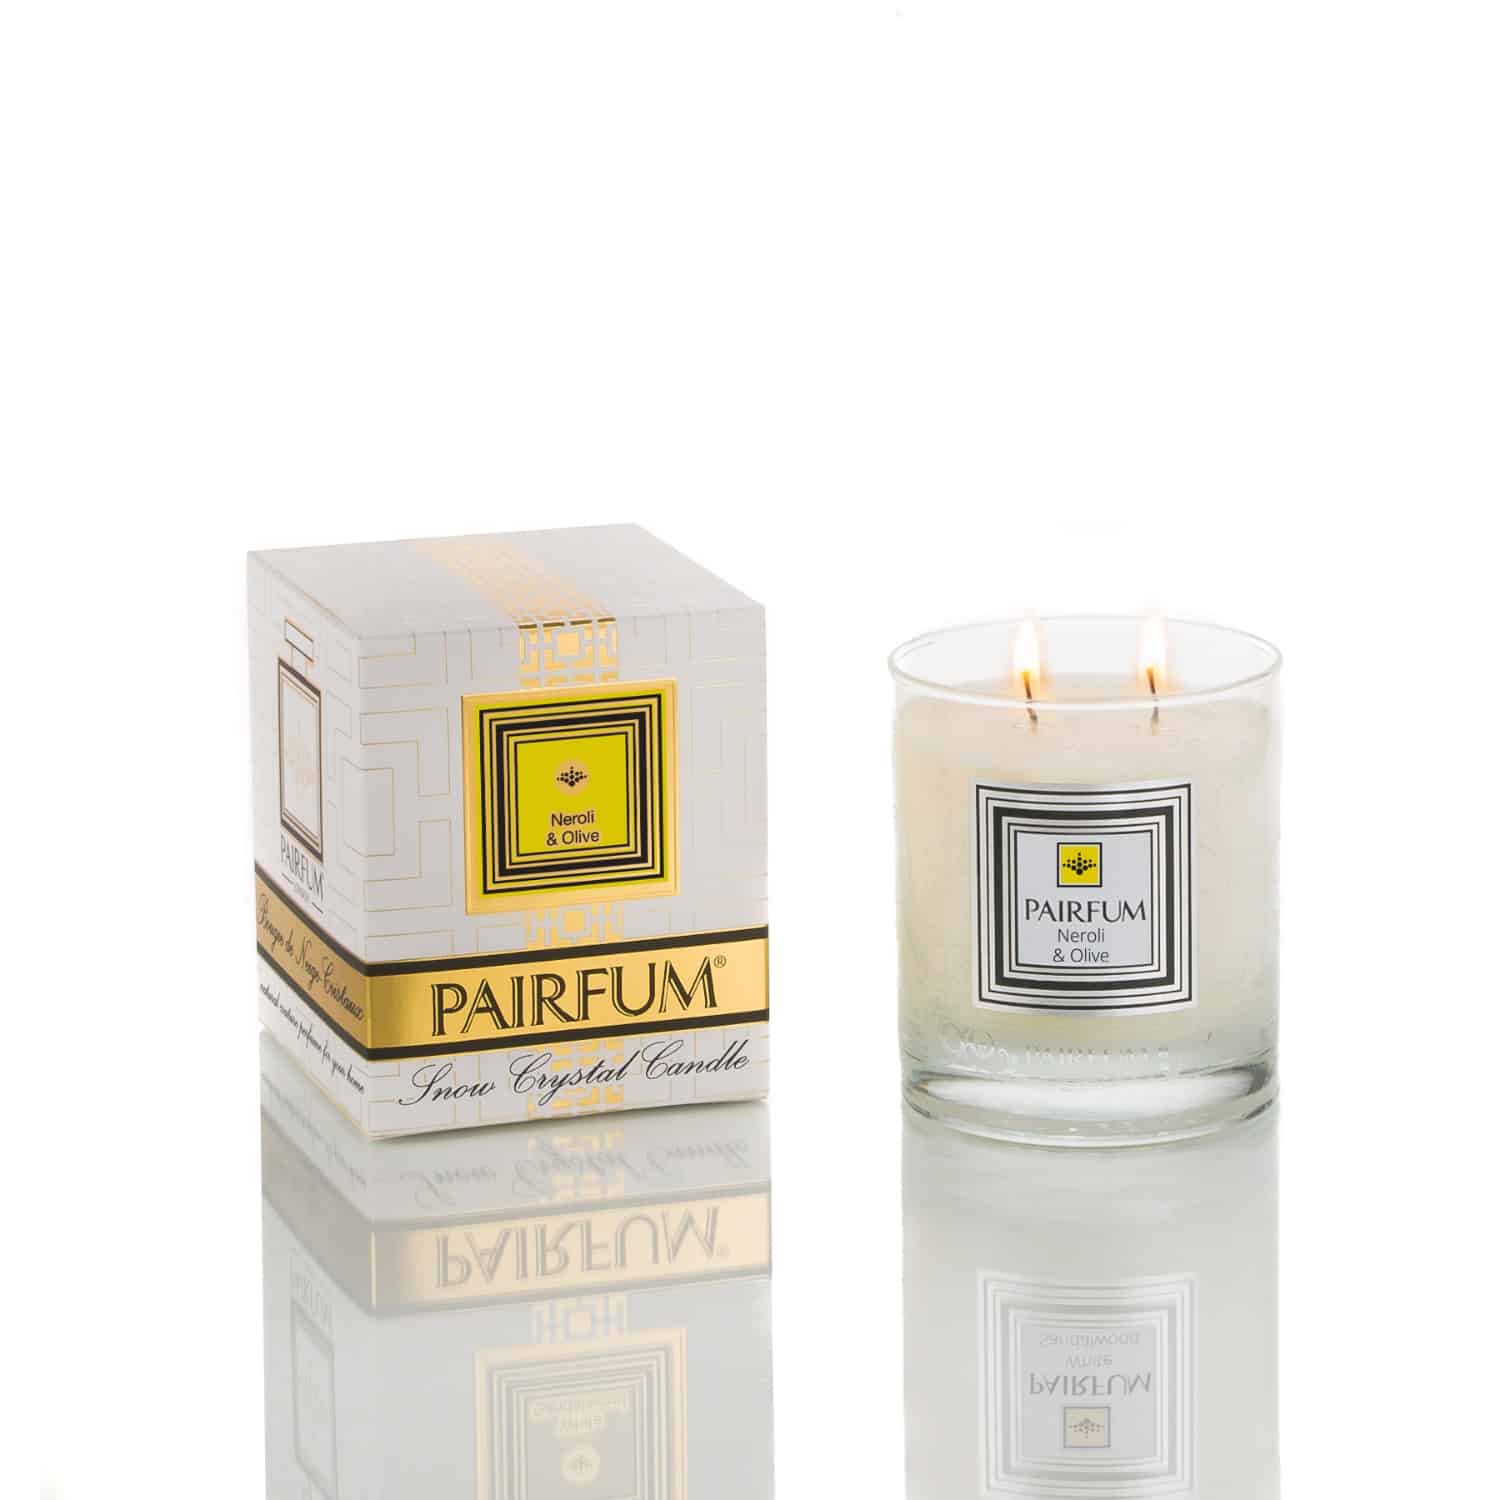 Pairfum Snow Crystal Candle Classic Pure Neroli Olive